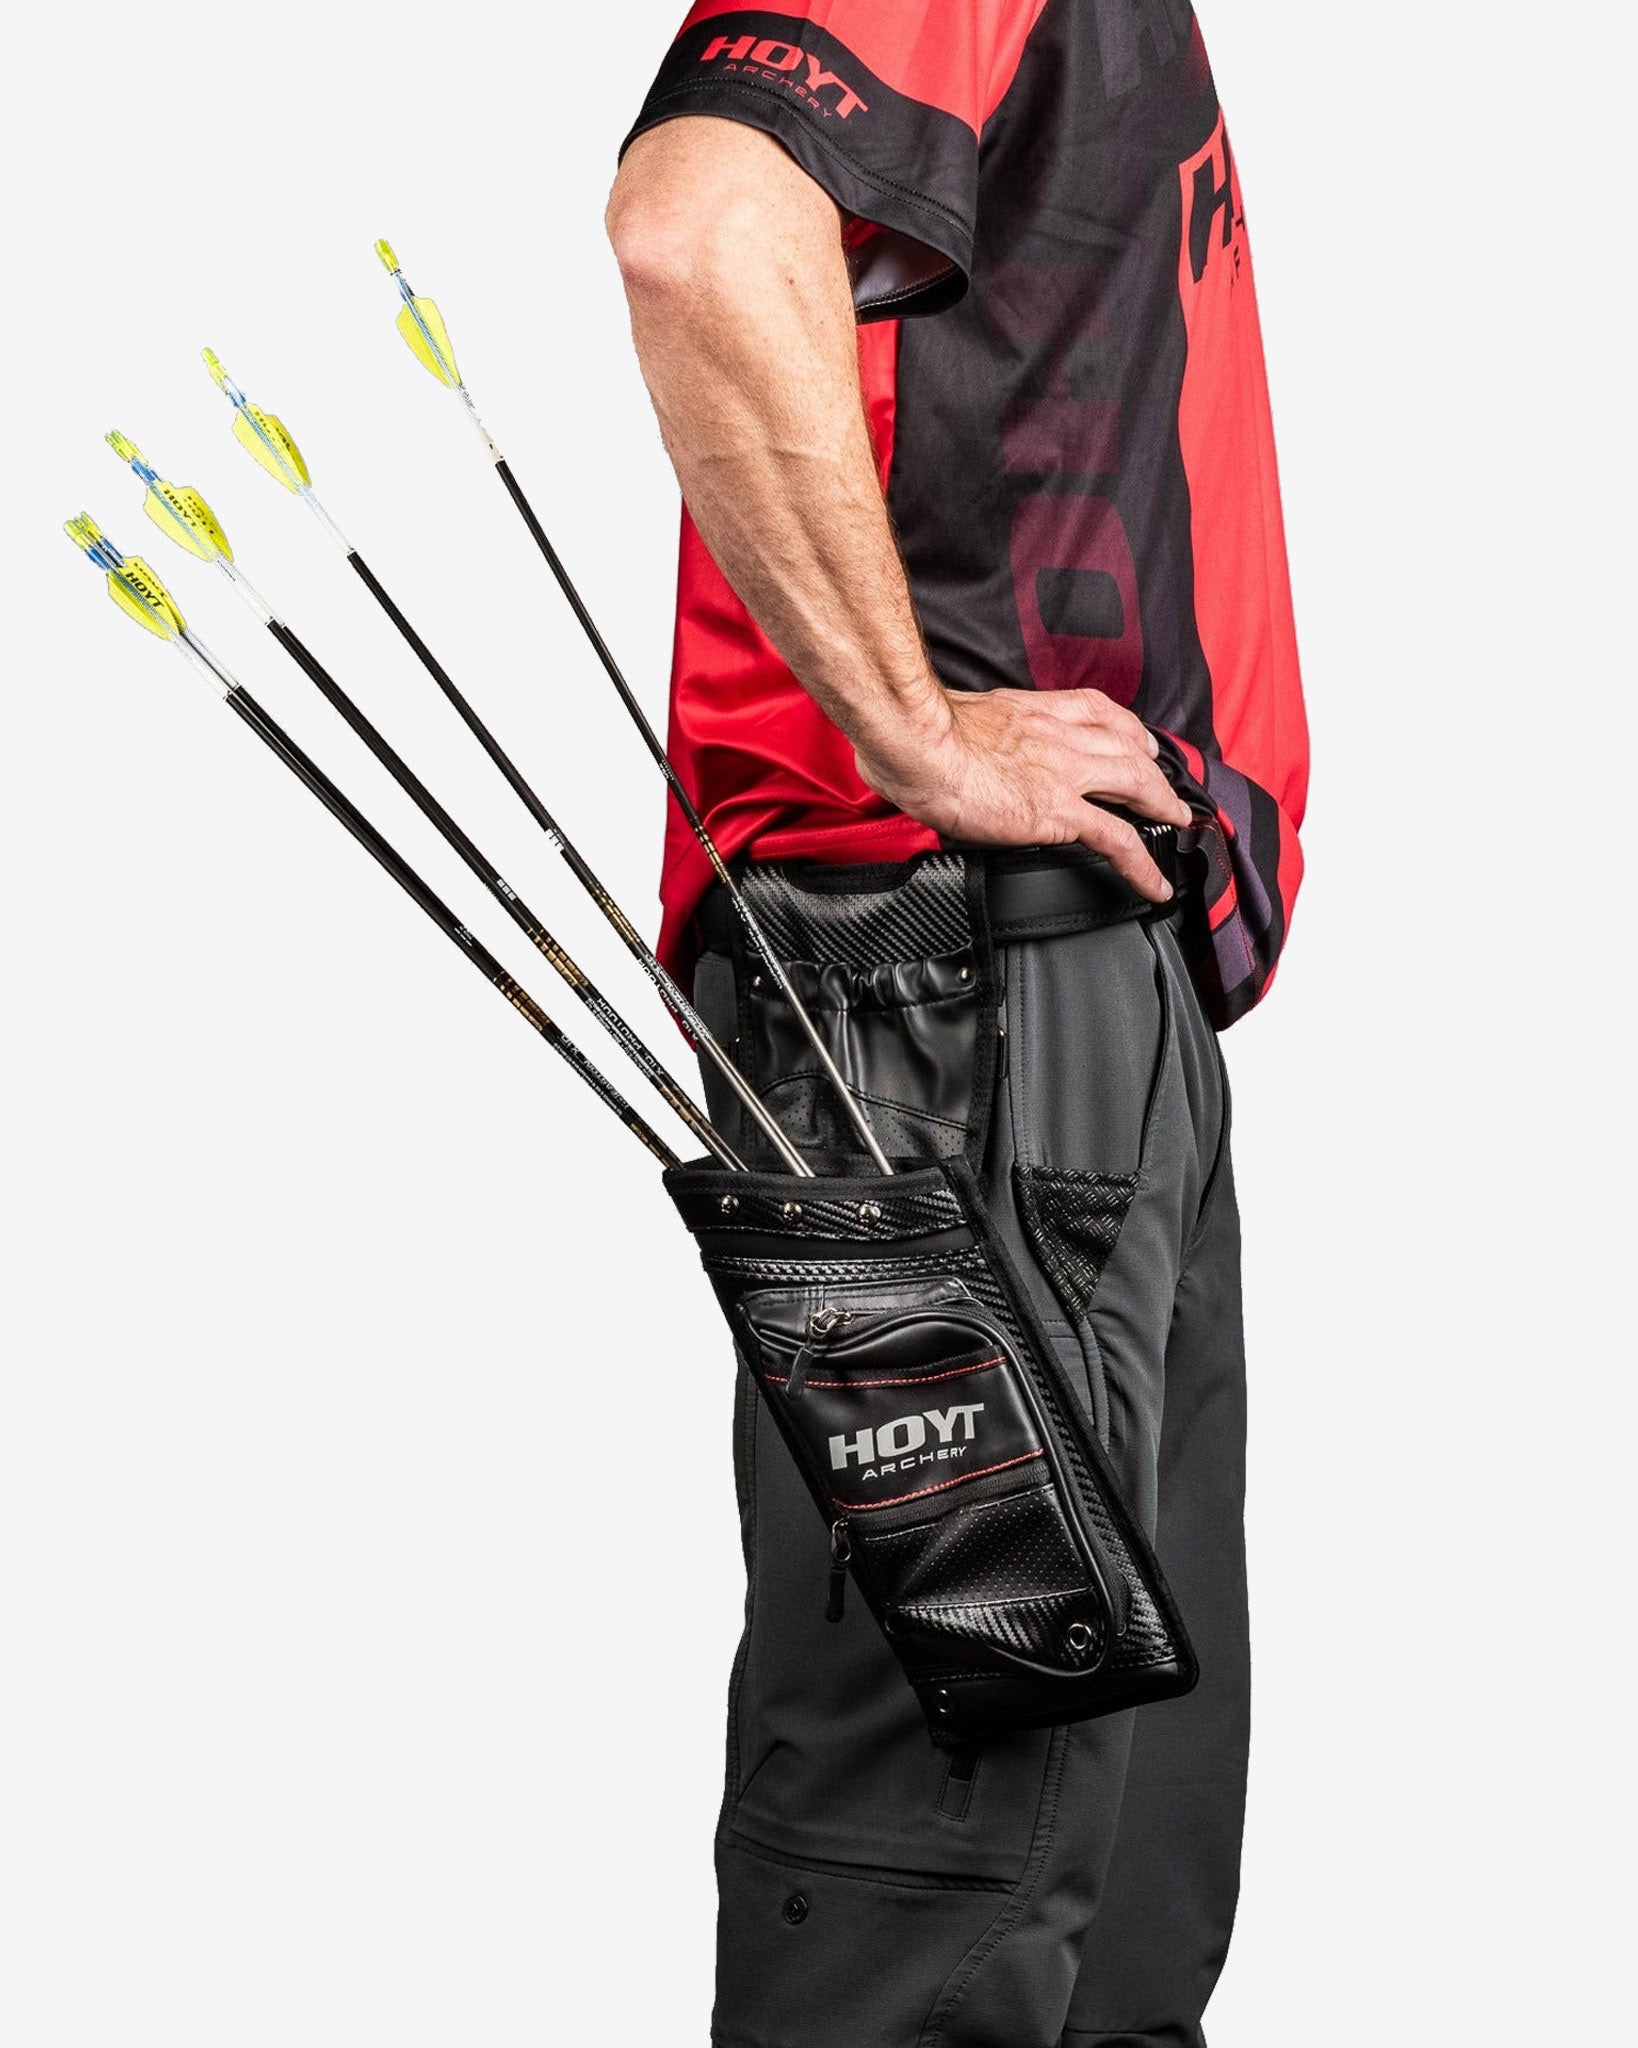 Range Time Field Quiver